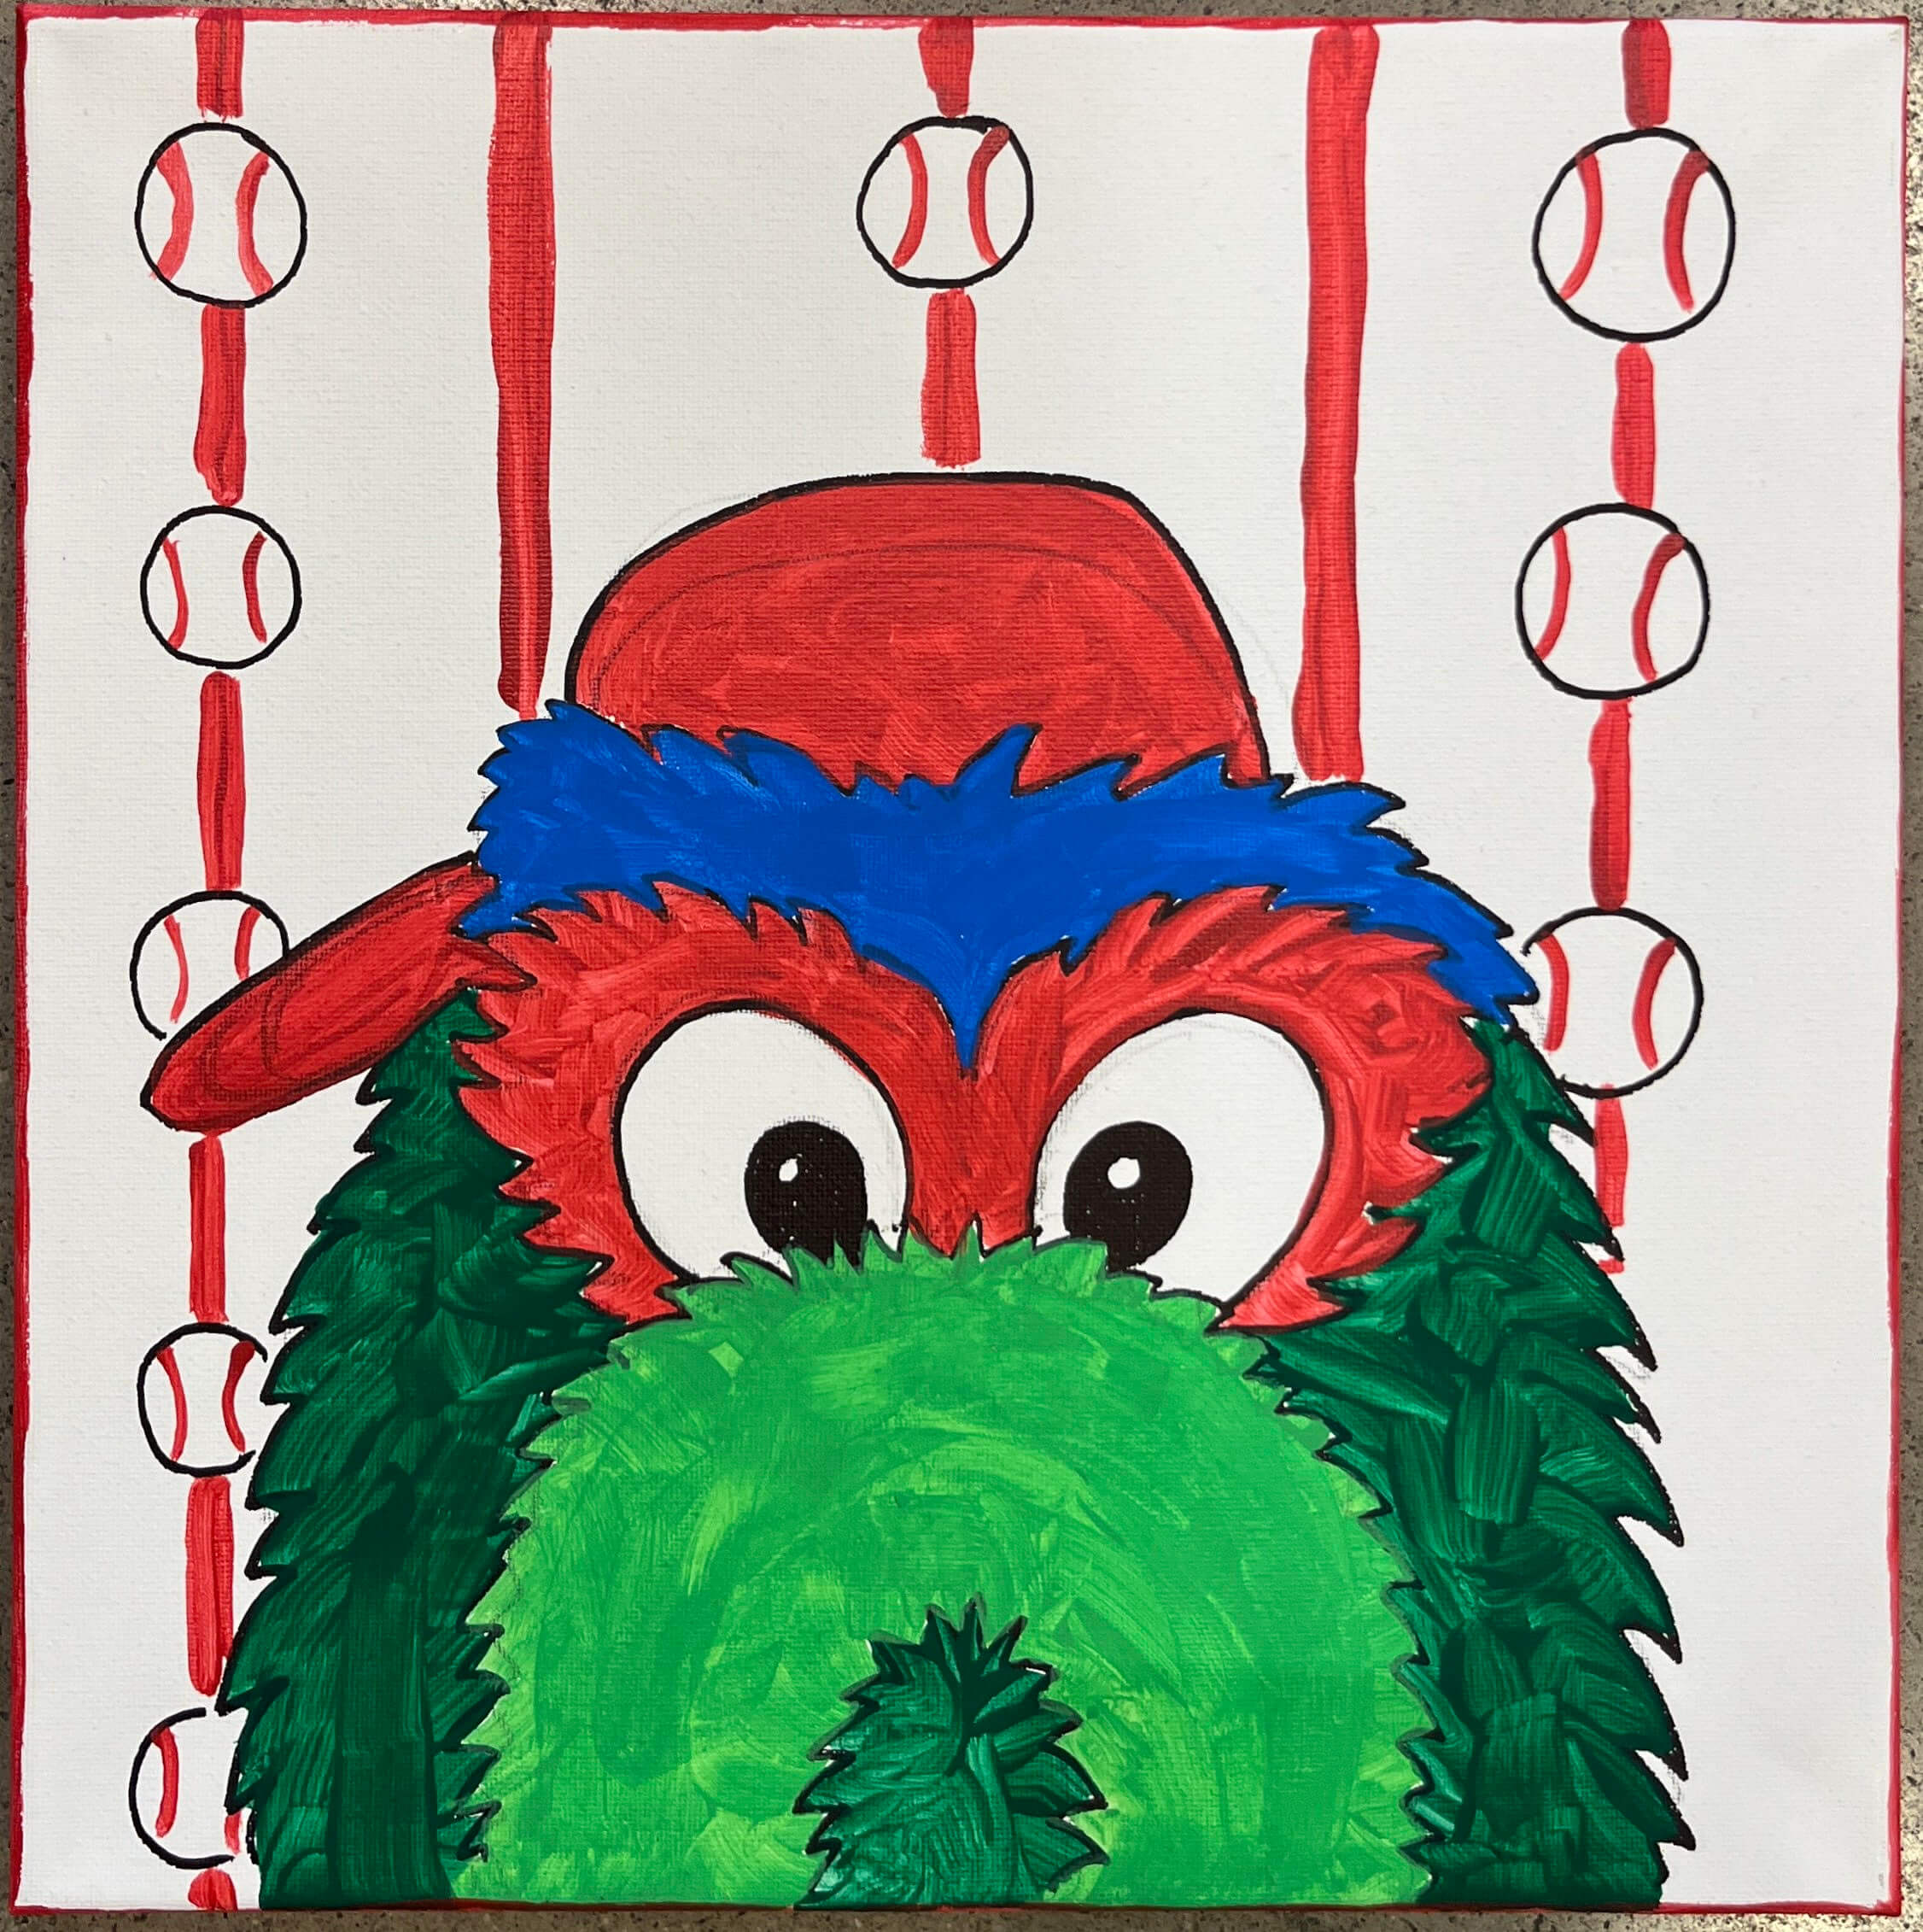 Opening Day Philly Phanatic Paninting March 30th 12 PM